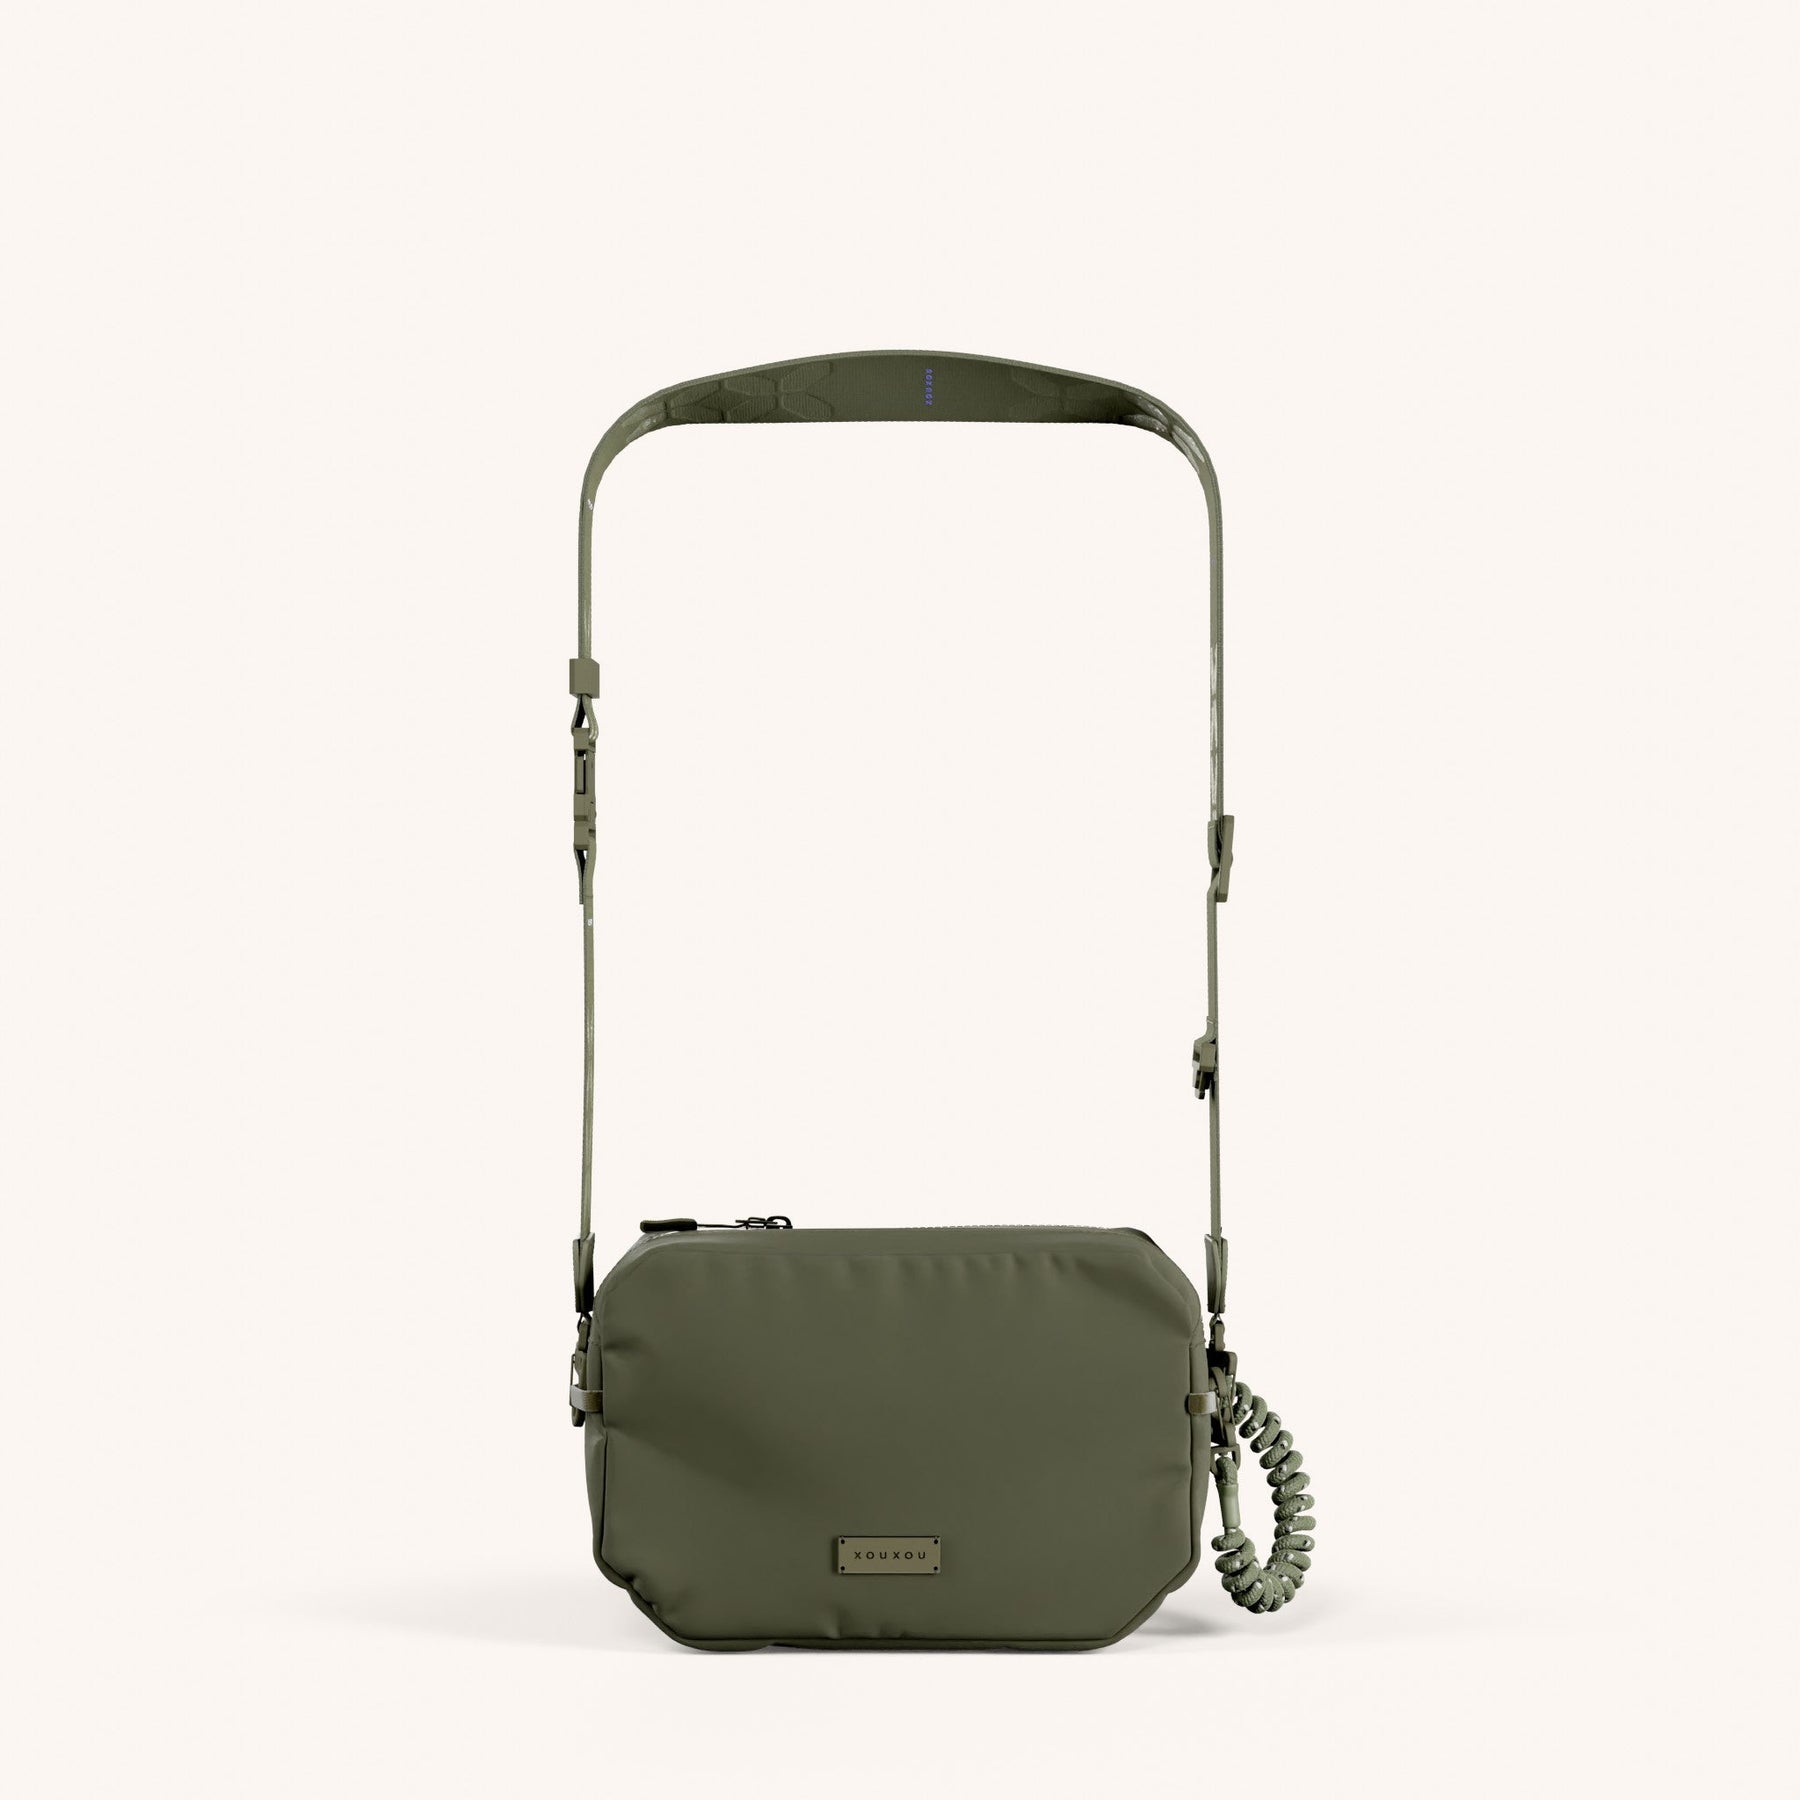 Crossbody Bag with Ultrawide Lanyard in Moss Total View | XOUXOU